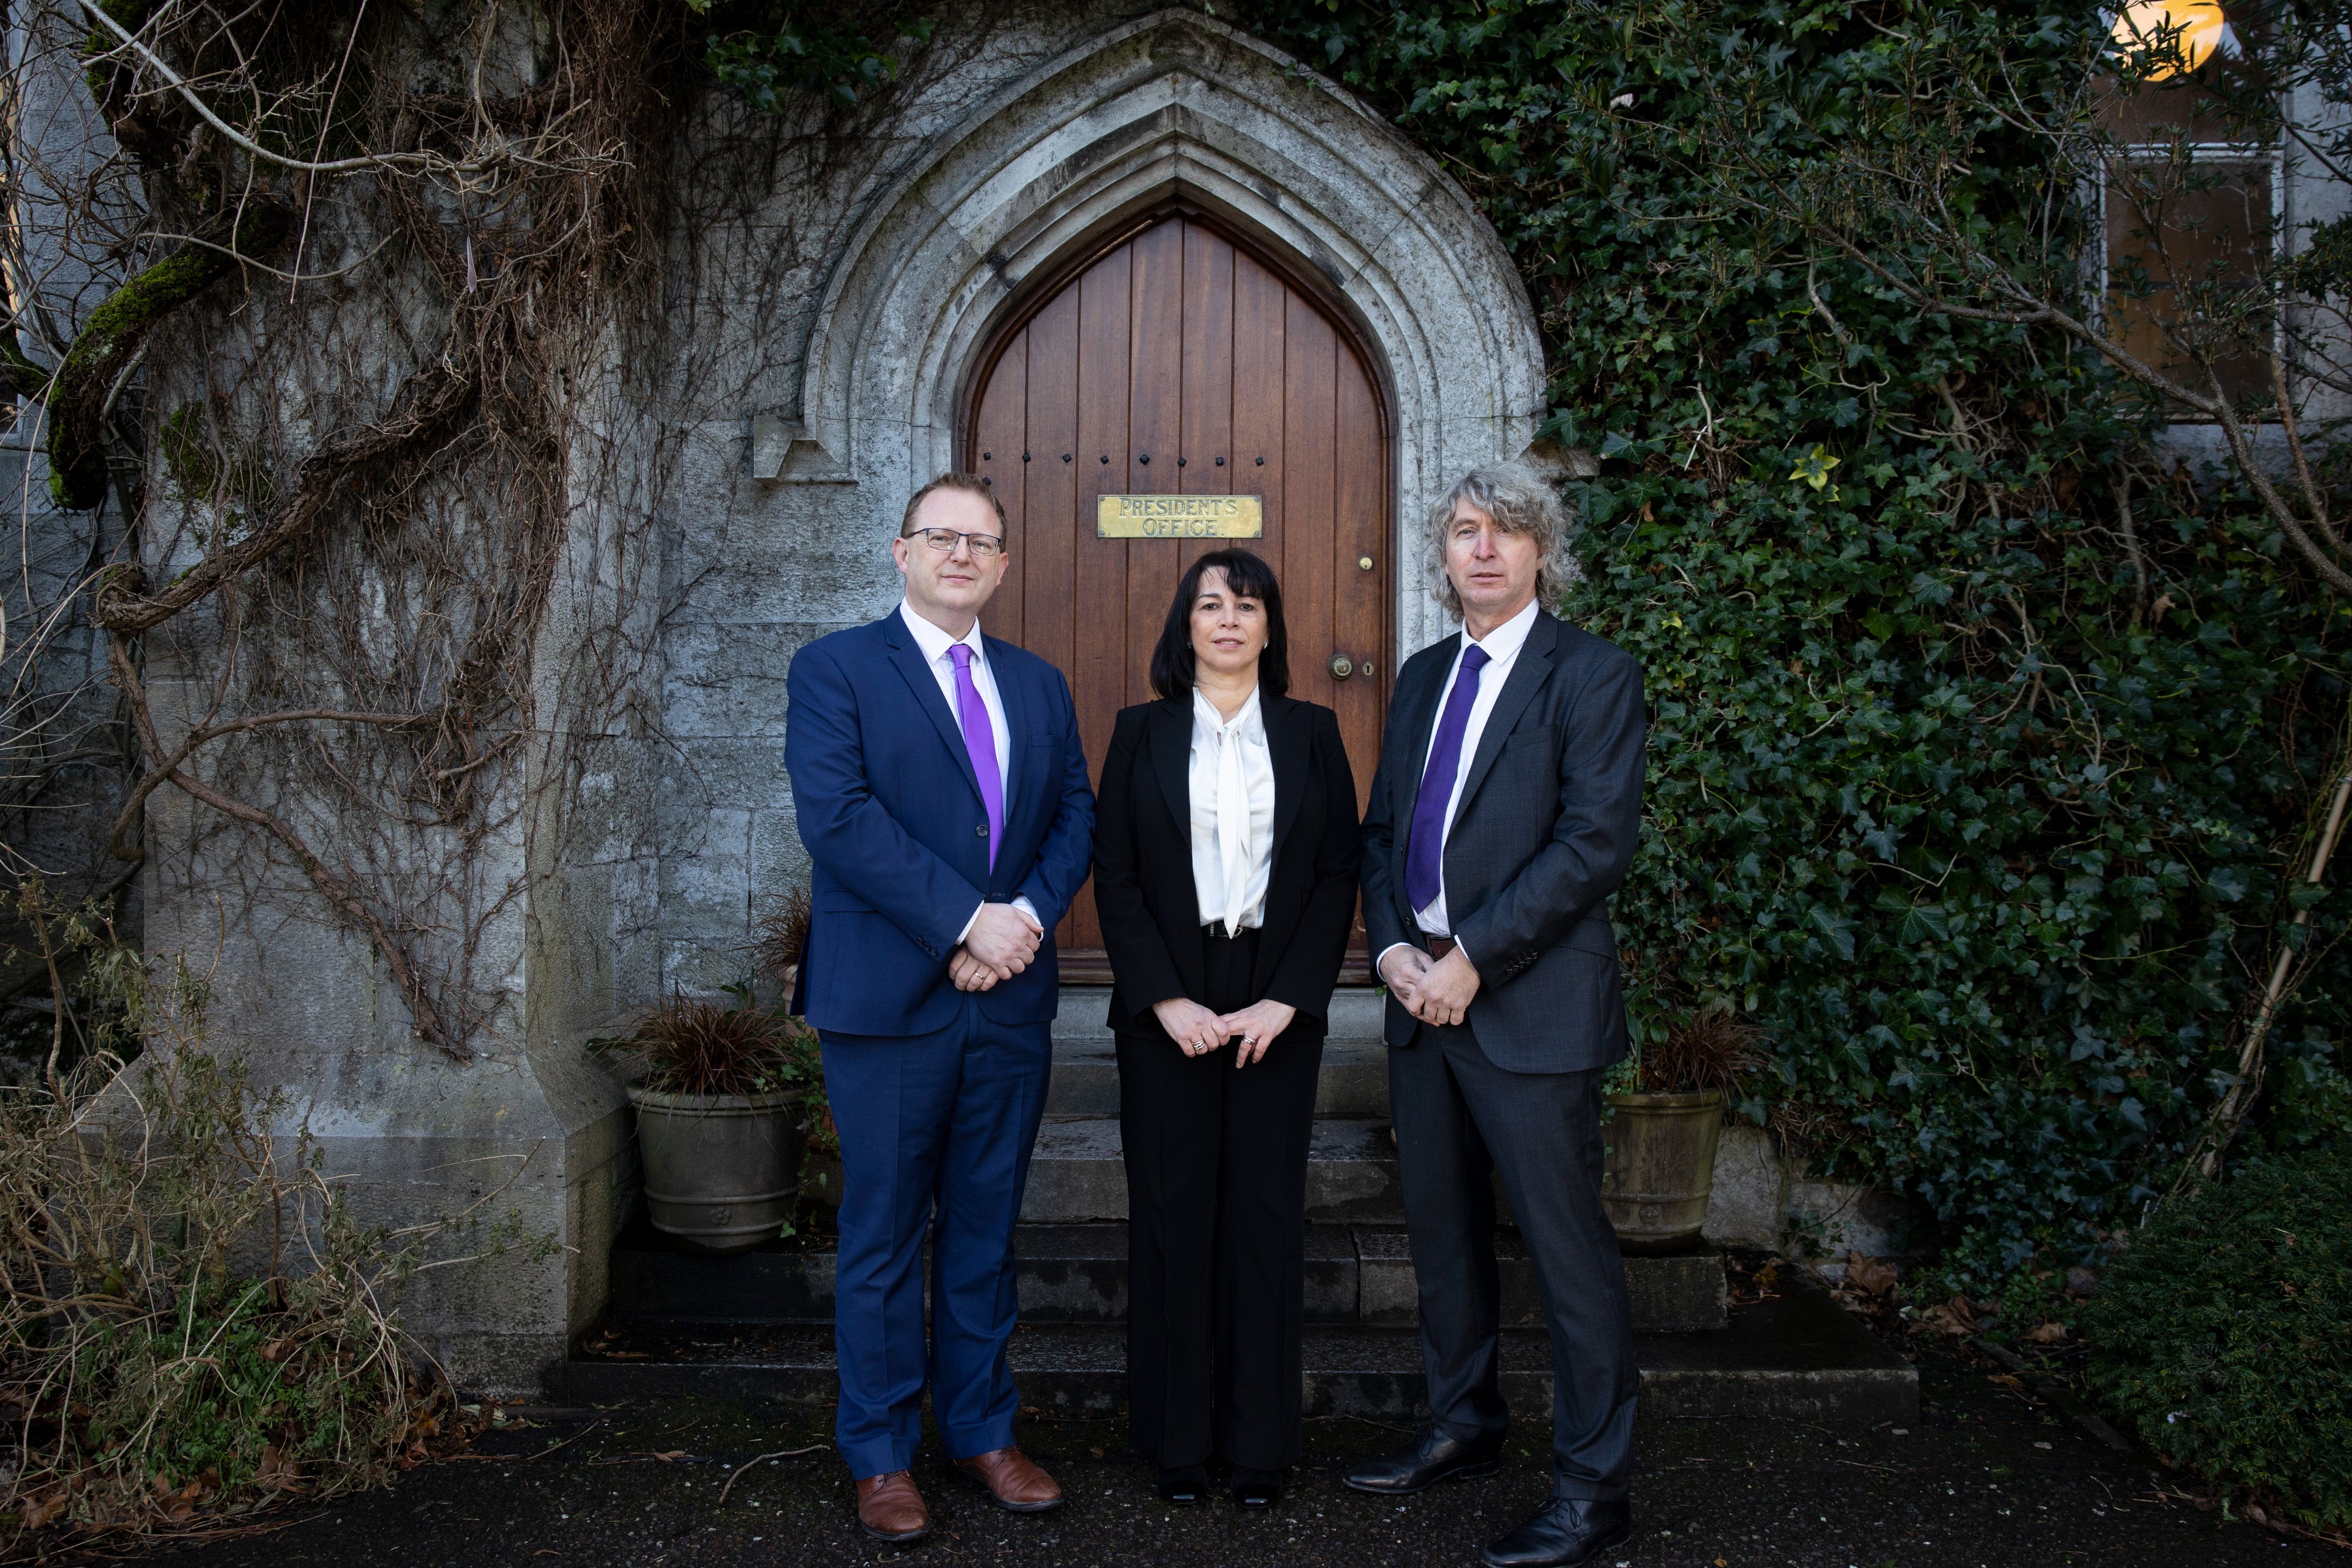 The centre is led by Prof Seamus O'Mahony, Food & Nutritional Sciences, Prof Maria de Sousa Gallagher, School of Engineering & Architecture & Prof John Morrissey, School of Microbiology 